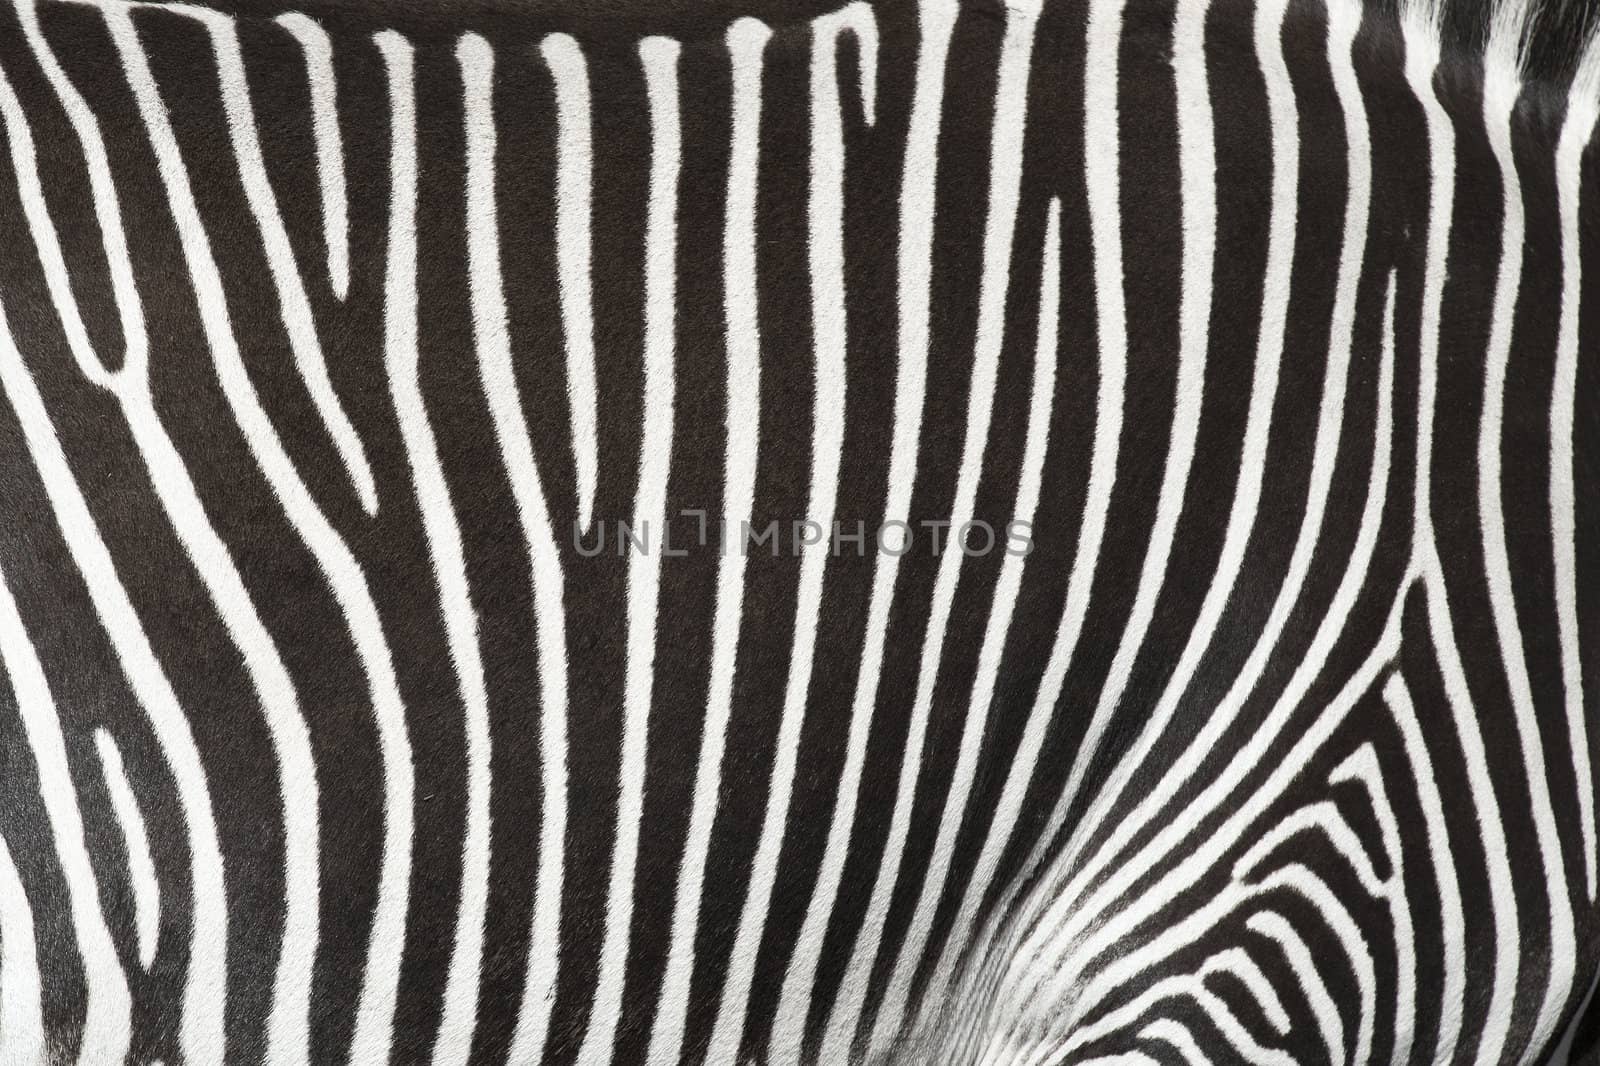 Natural texture of the skin of an African zebra.